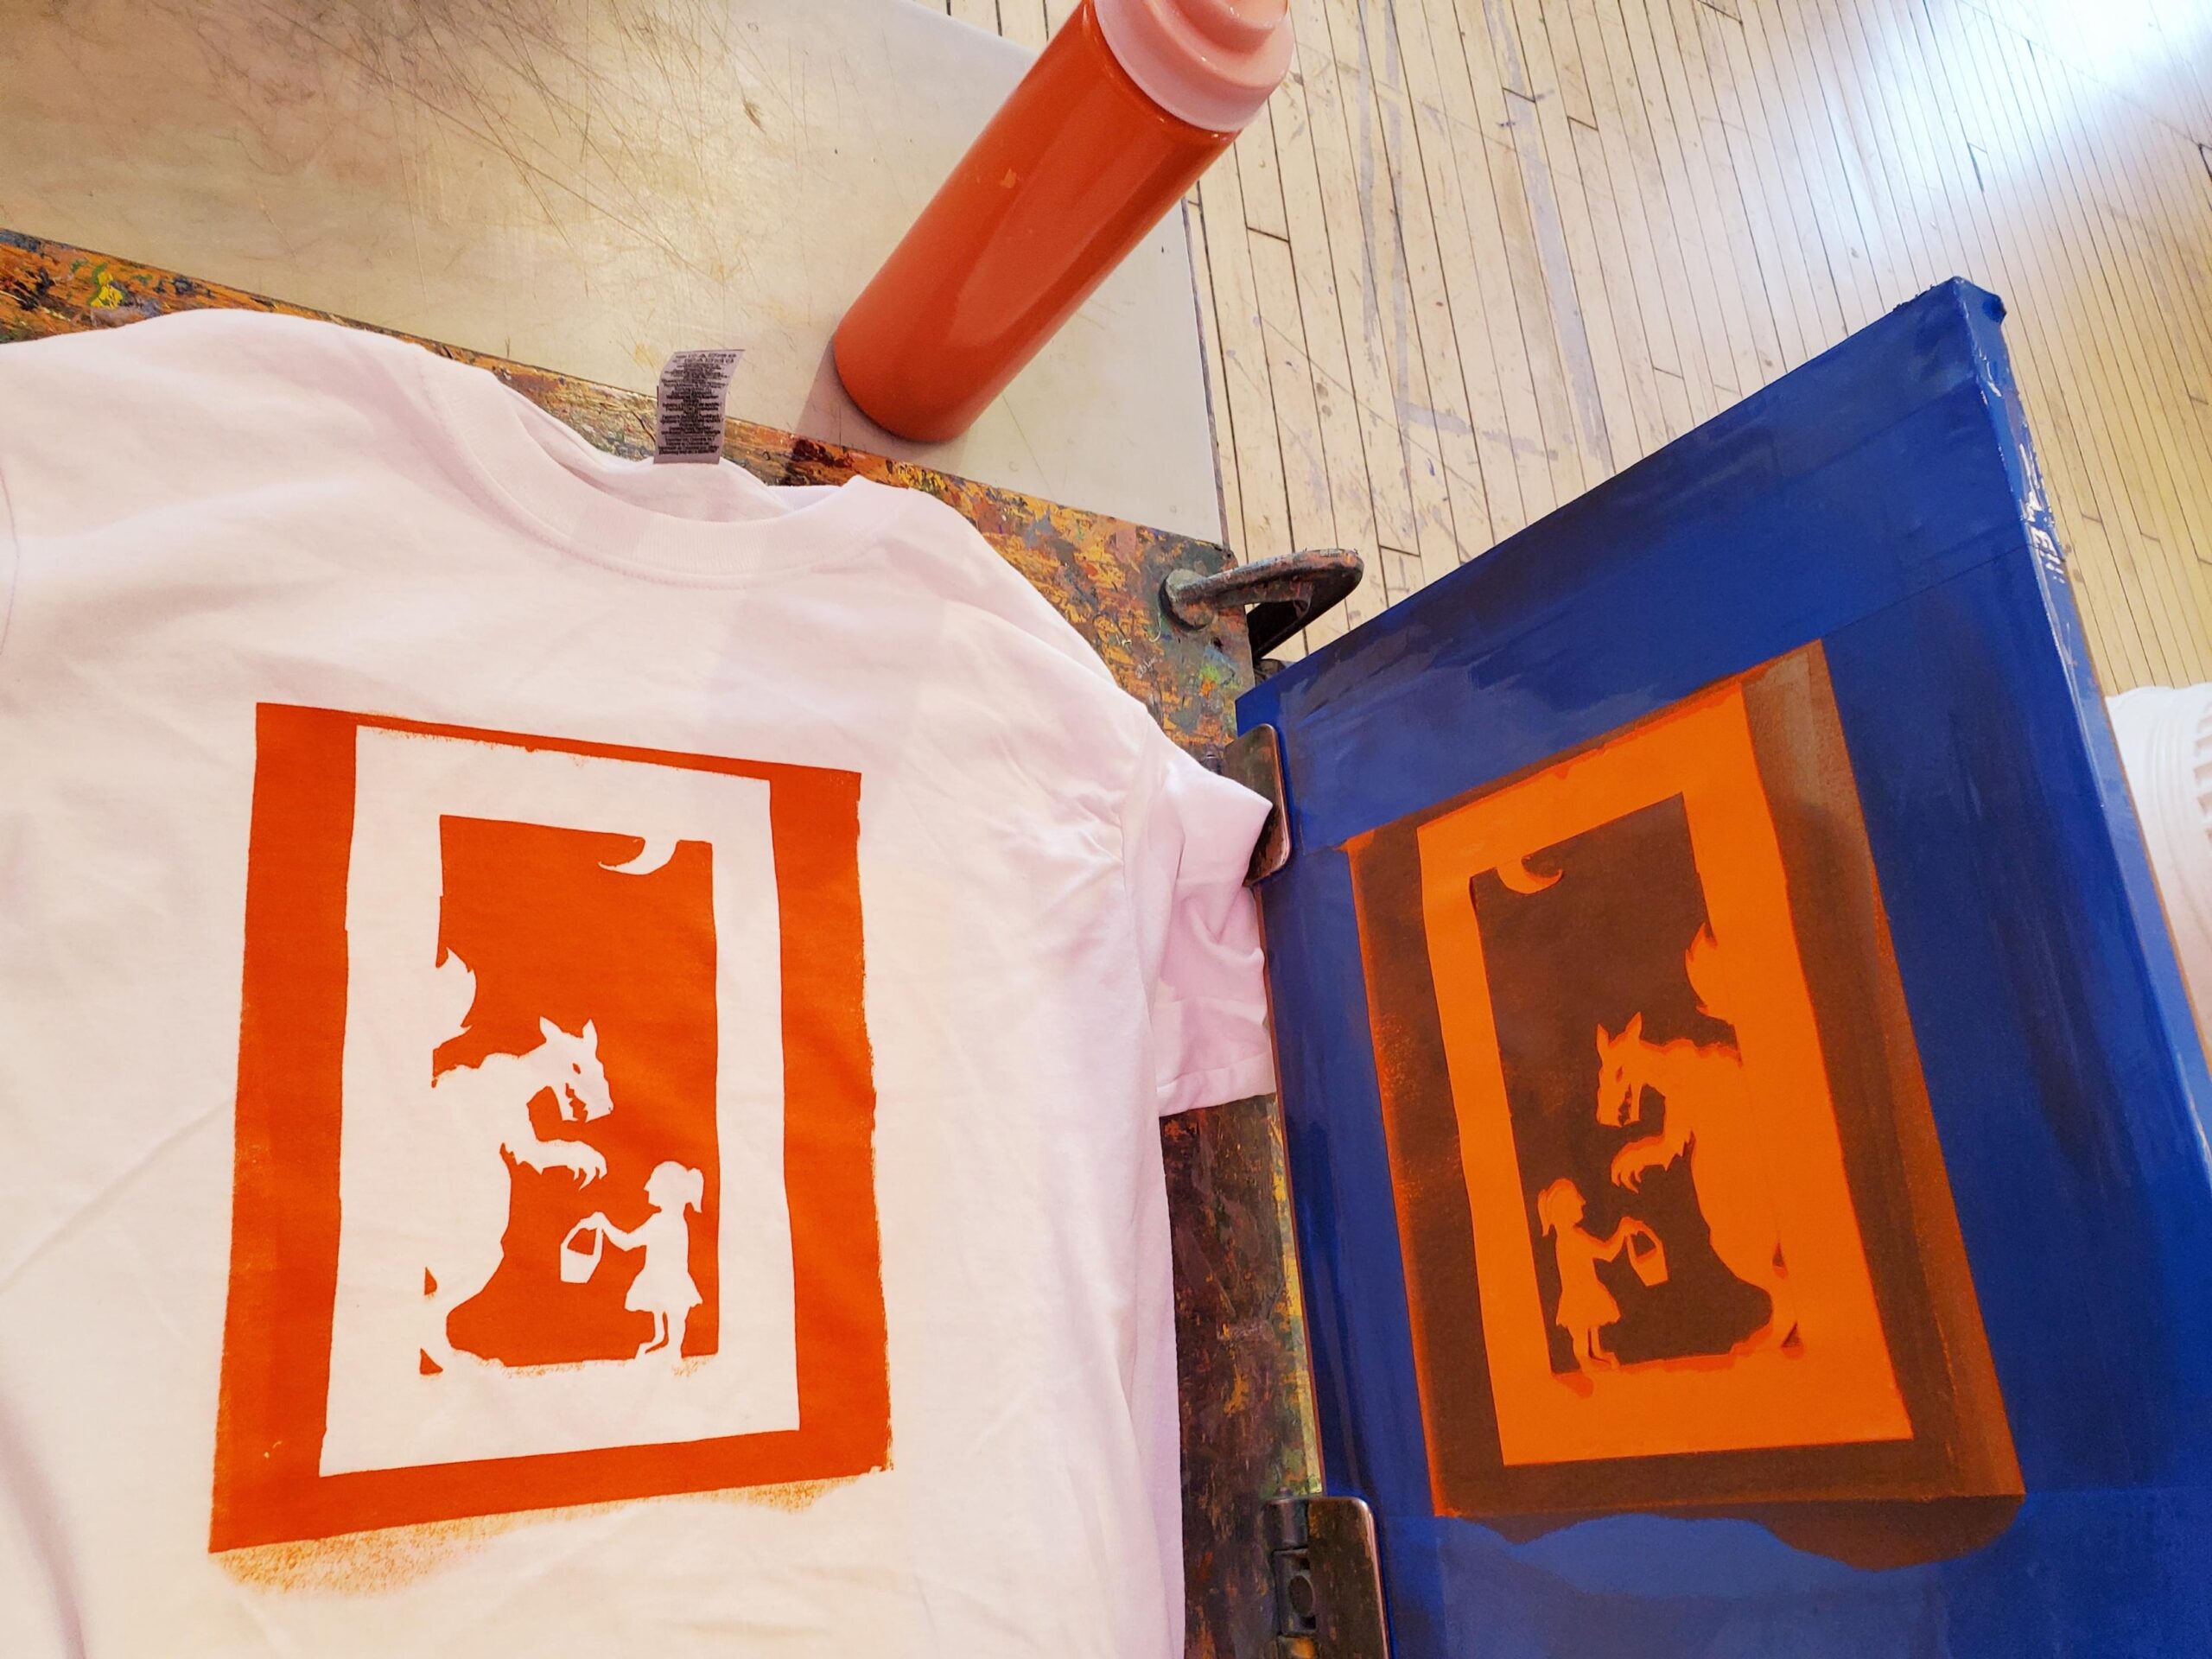 A t-shirt has just been screenprinted onto with orange ink. The screenprinted image shows a dragon and a child holding a basket.